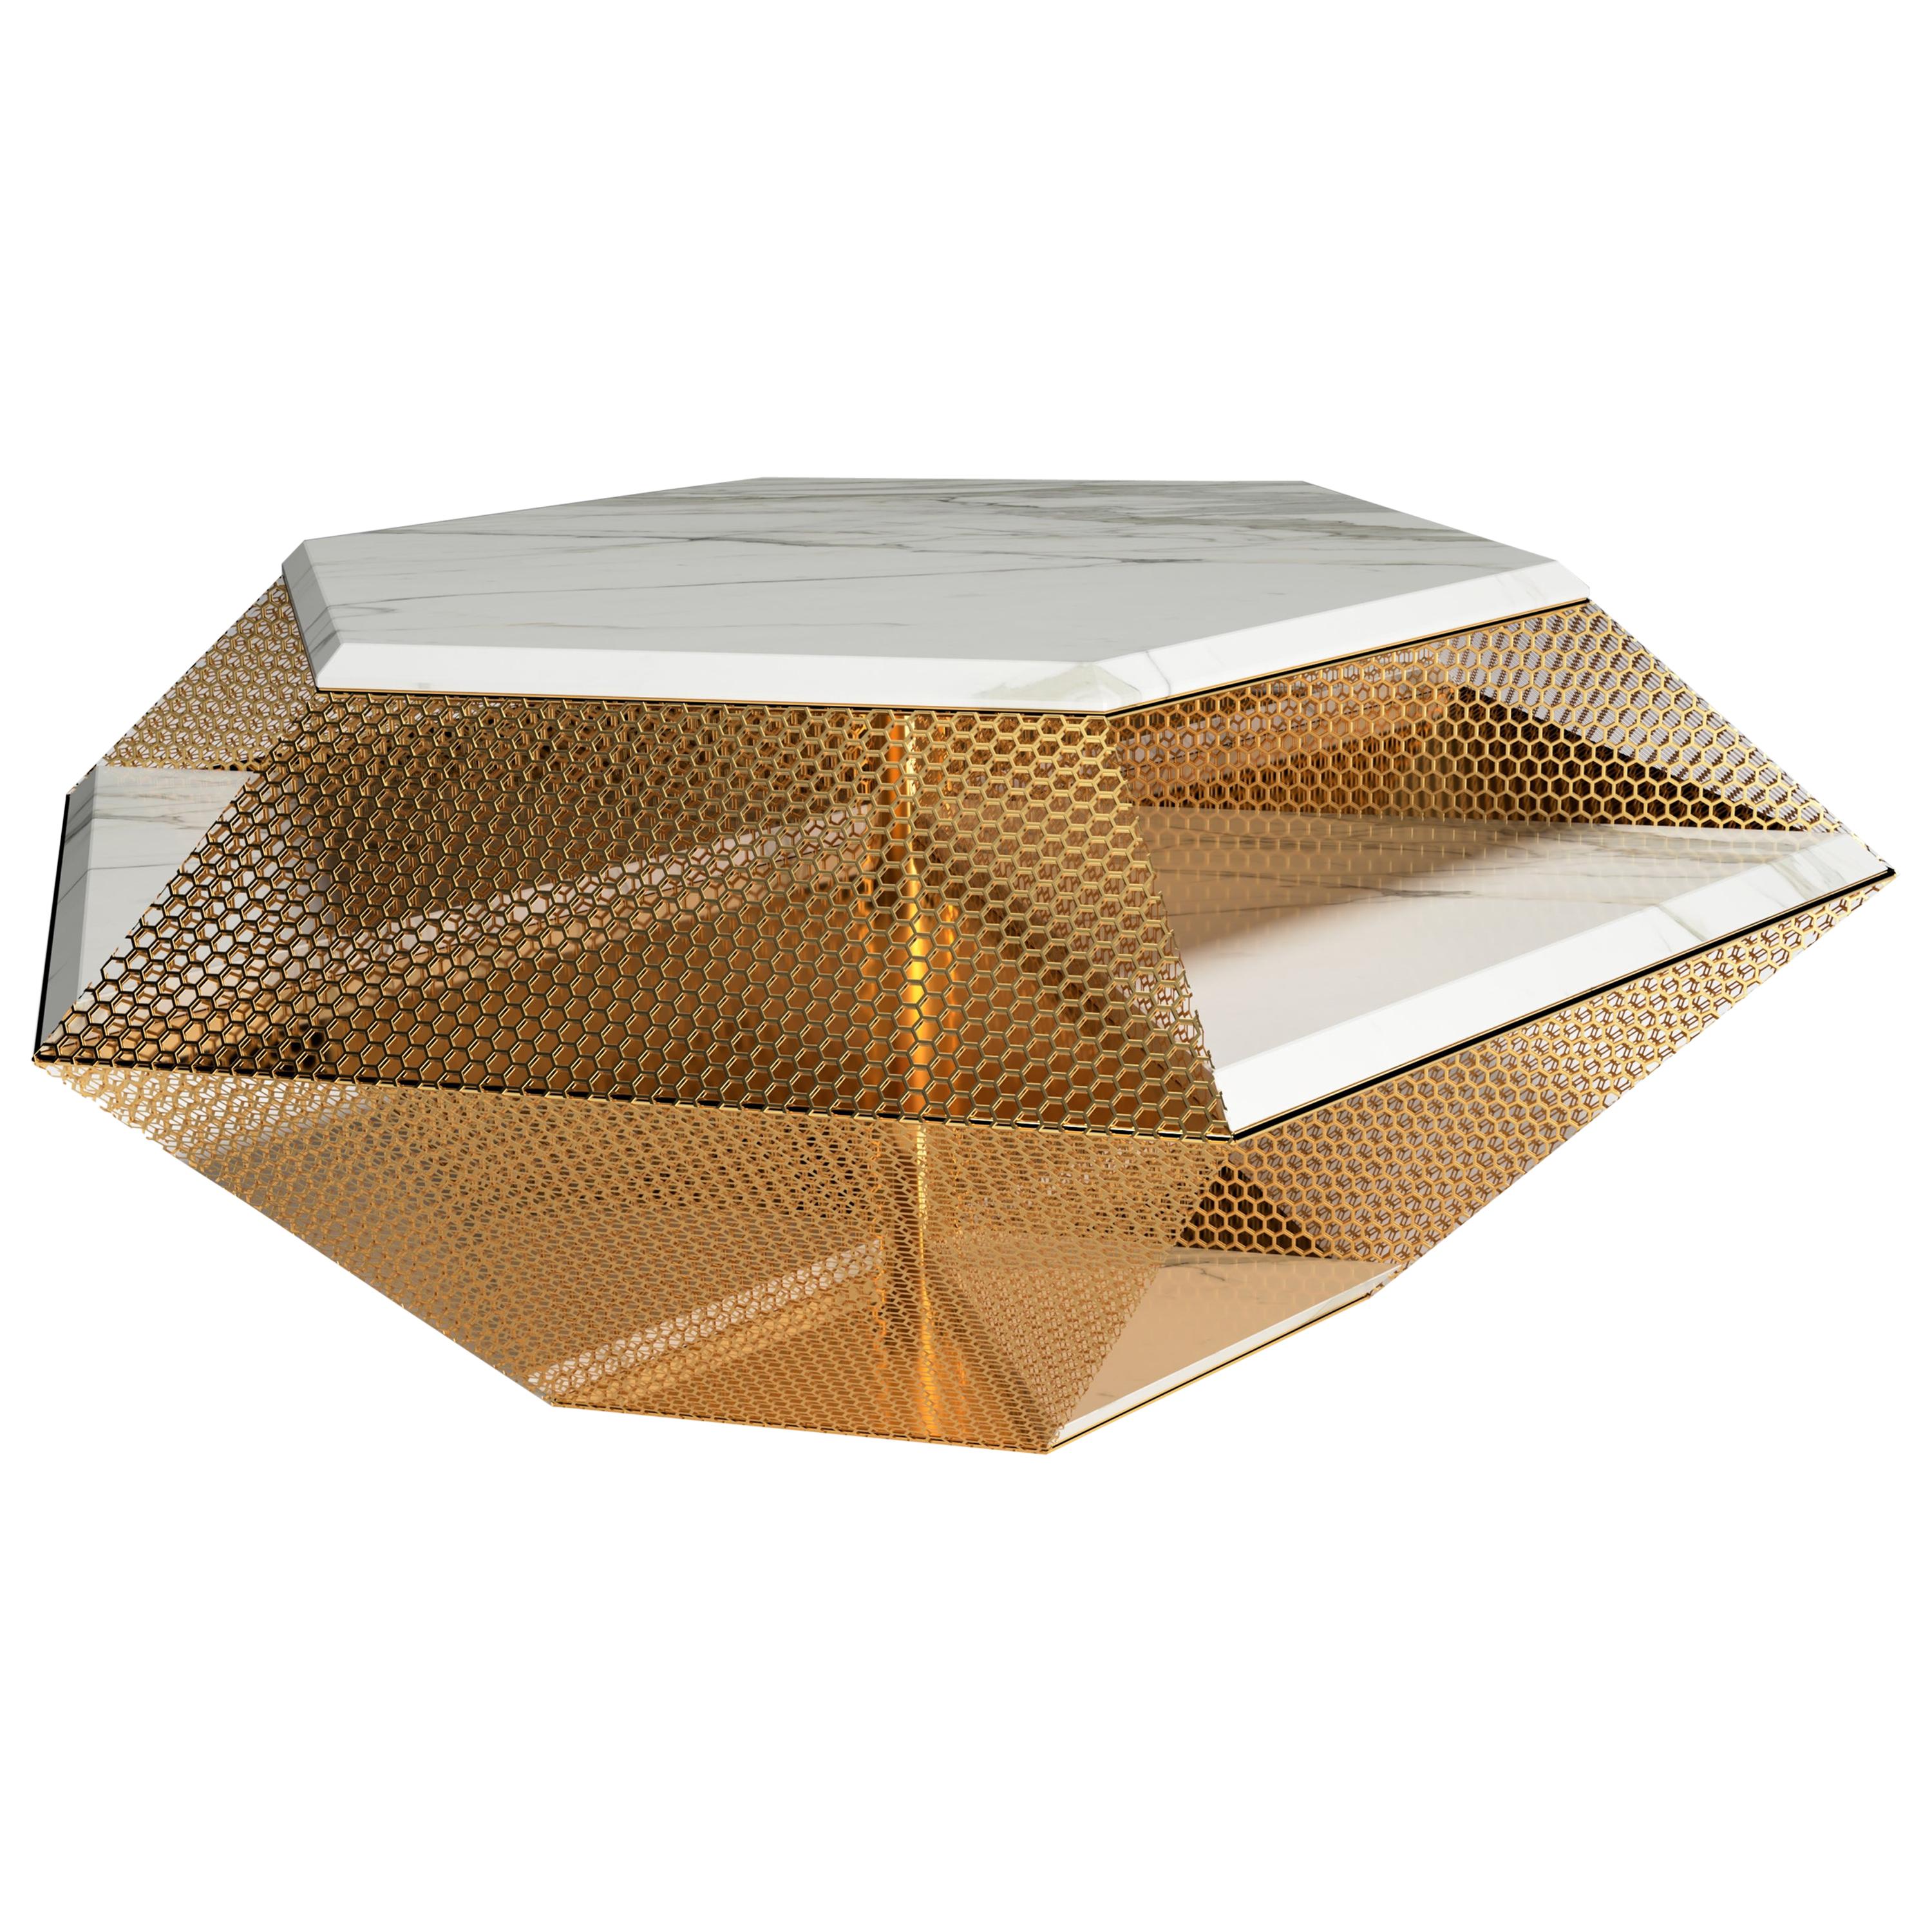 "The Rough Diamond" Center Table ft. Calacatta Marble and Brass